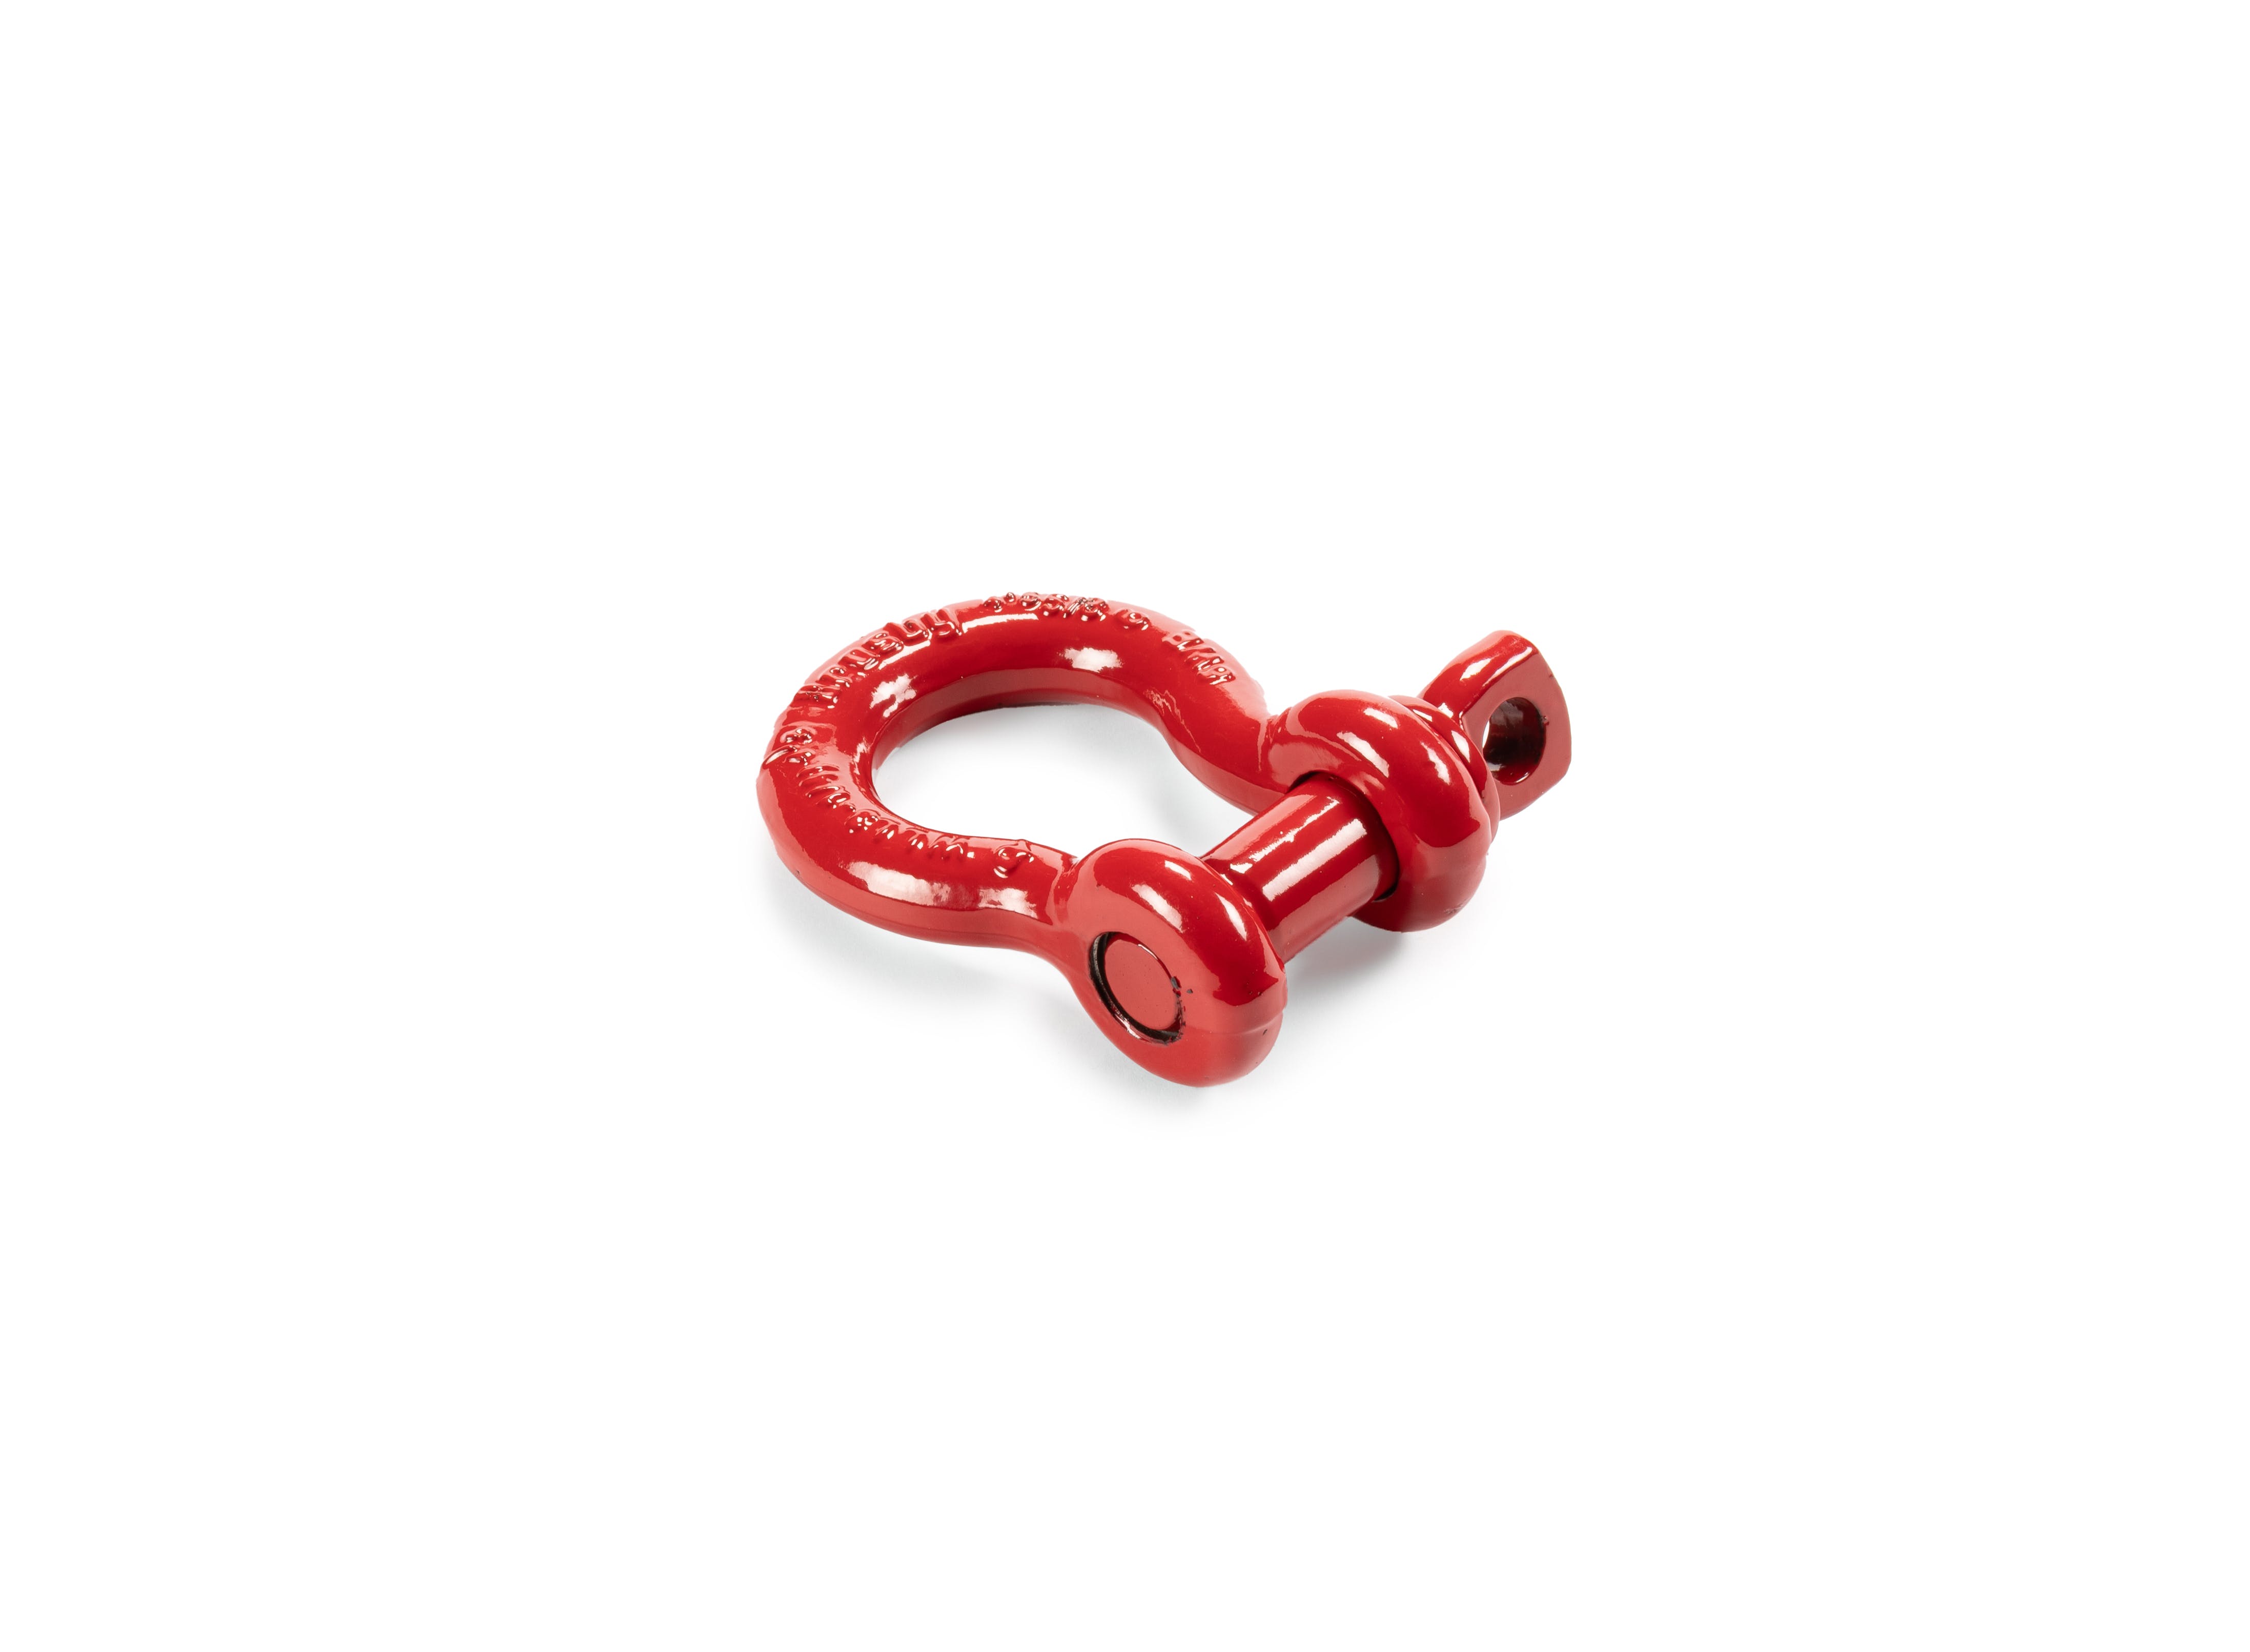 Factor 55 00061-01 Crosby 5/8 Shackle- Red